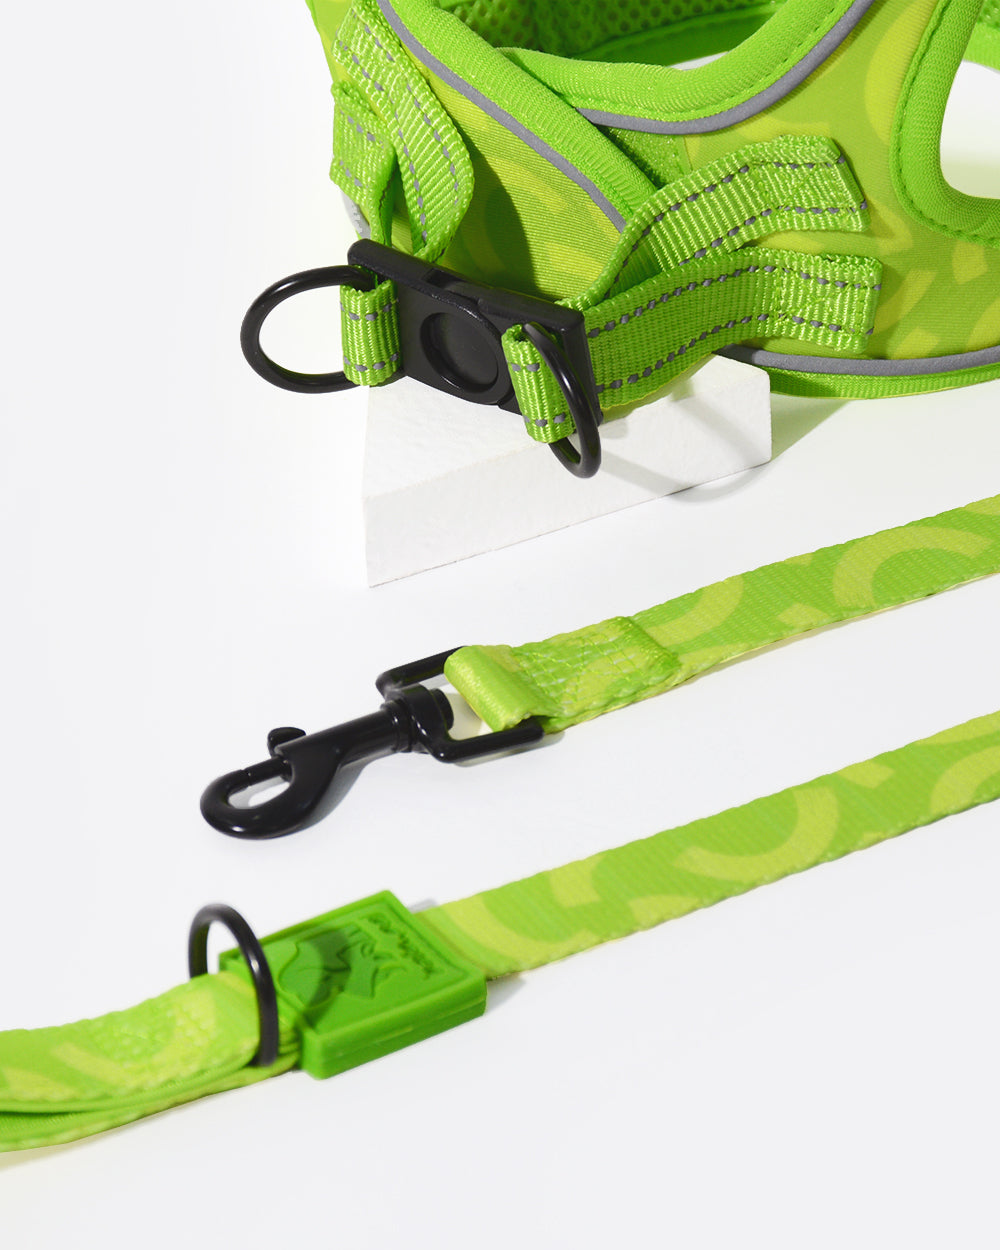 OxyMesh Velcro Step-in Harness and Leash Set - Gardener